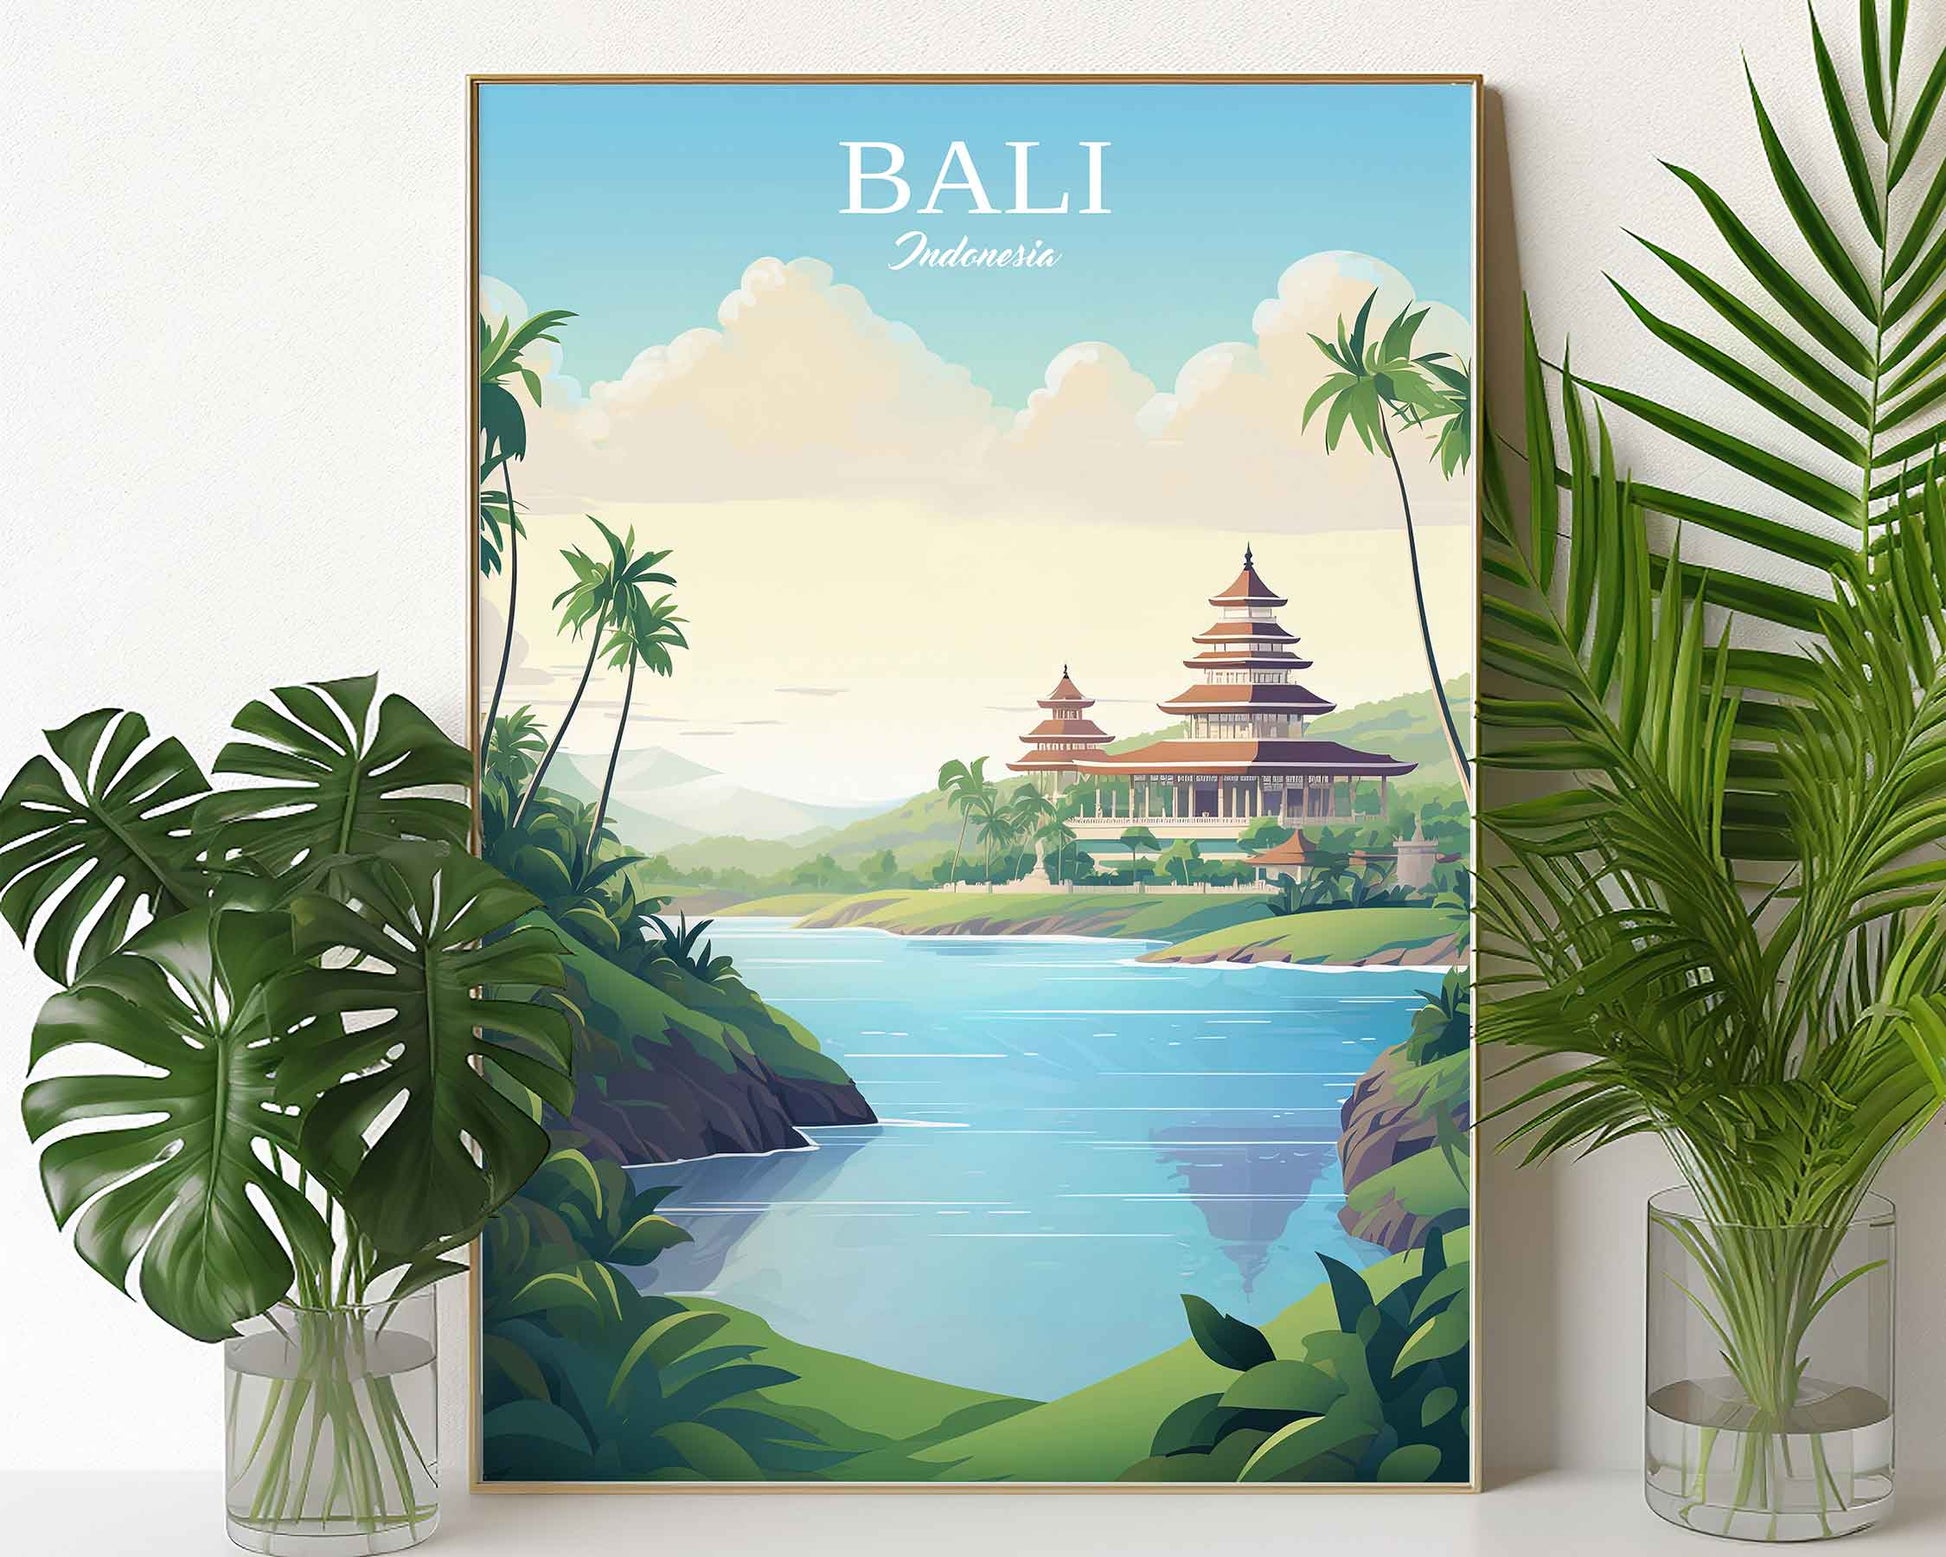 Framed Image of Bali Indonesia Print Travel Posters Illustration Wall Art